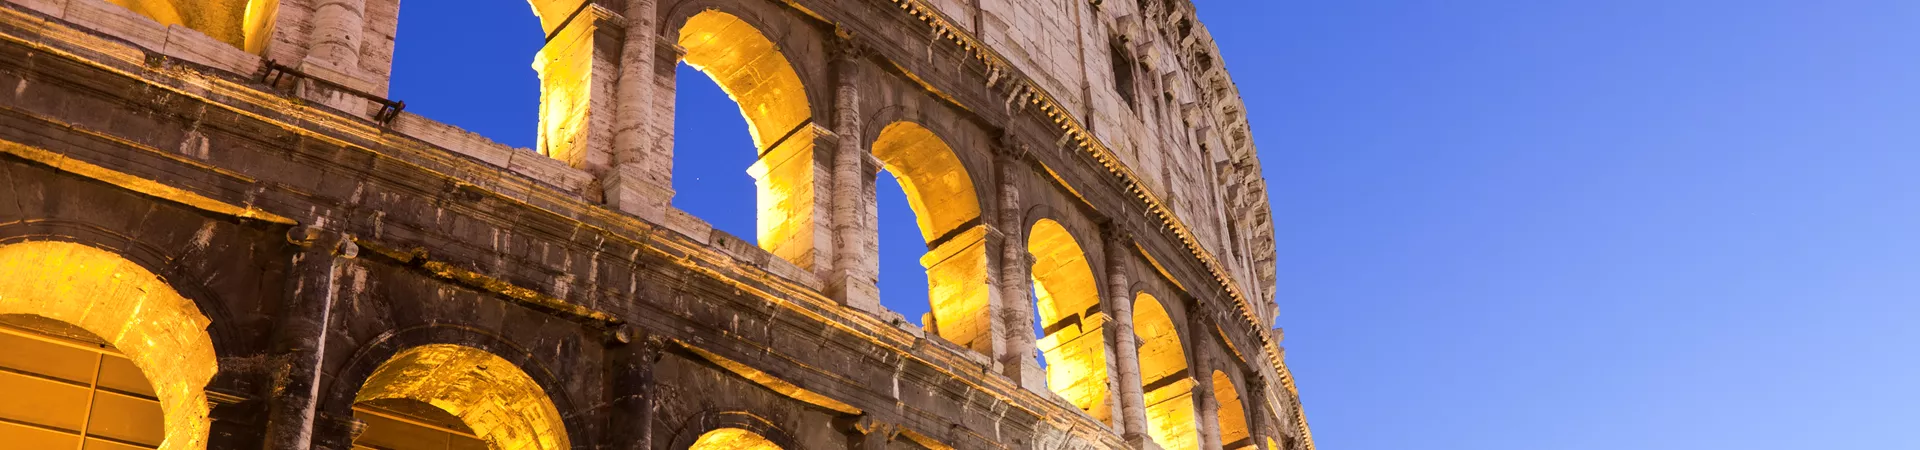 Colosseum Rome Italy At Night Detail 164928627